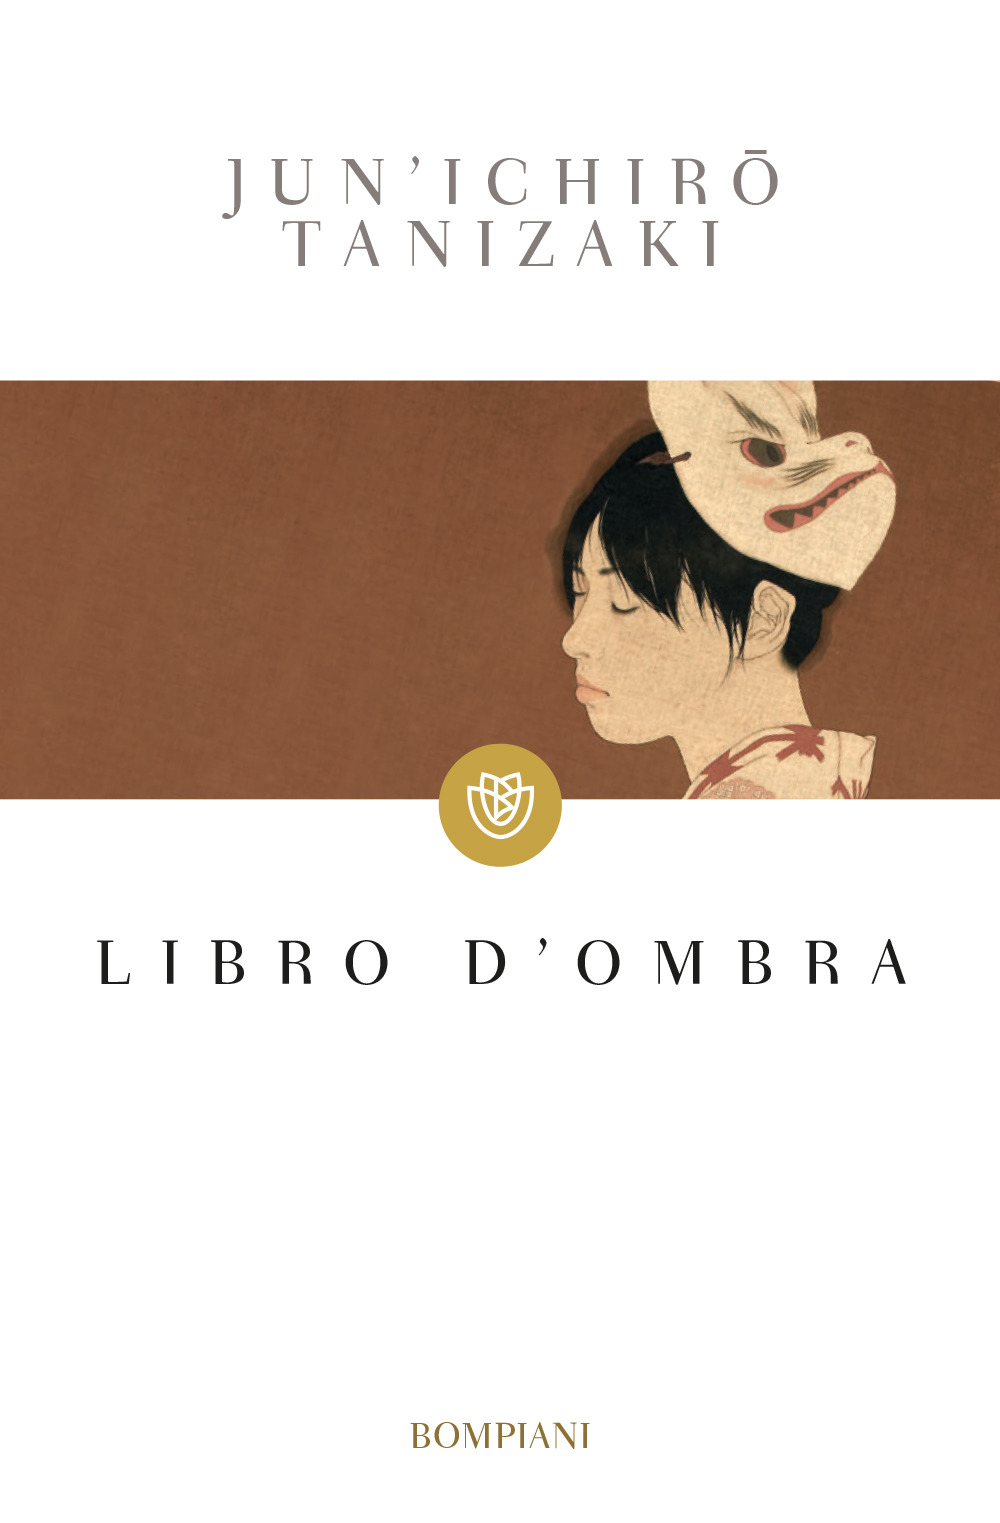 Image of Libro d'ombra